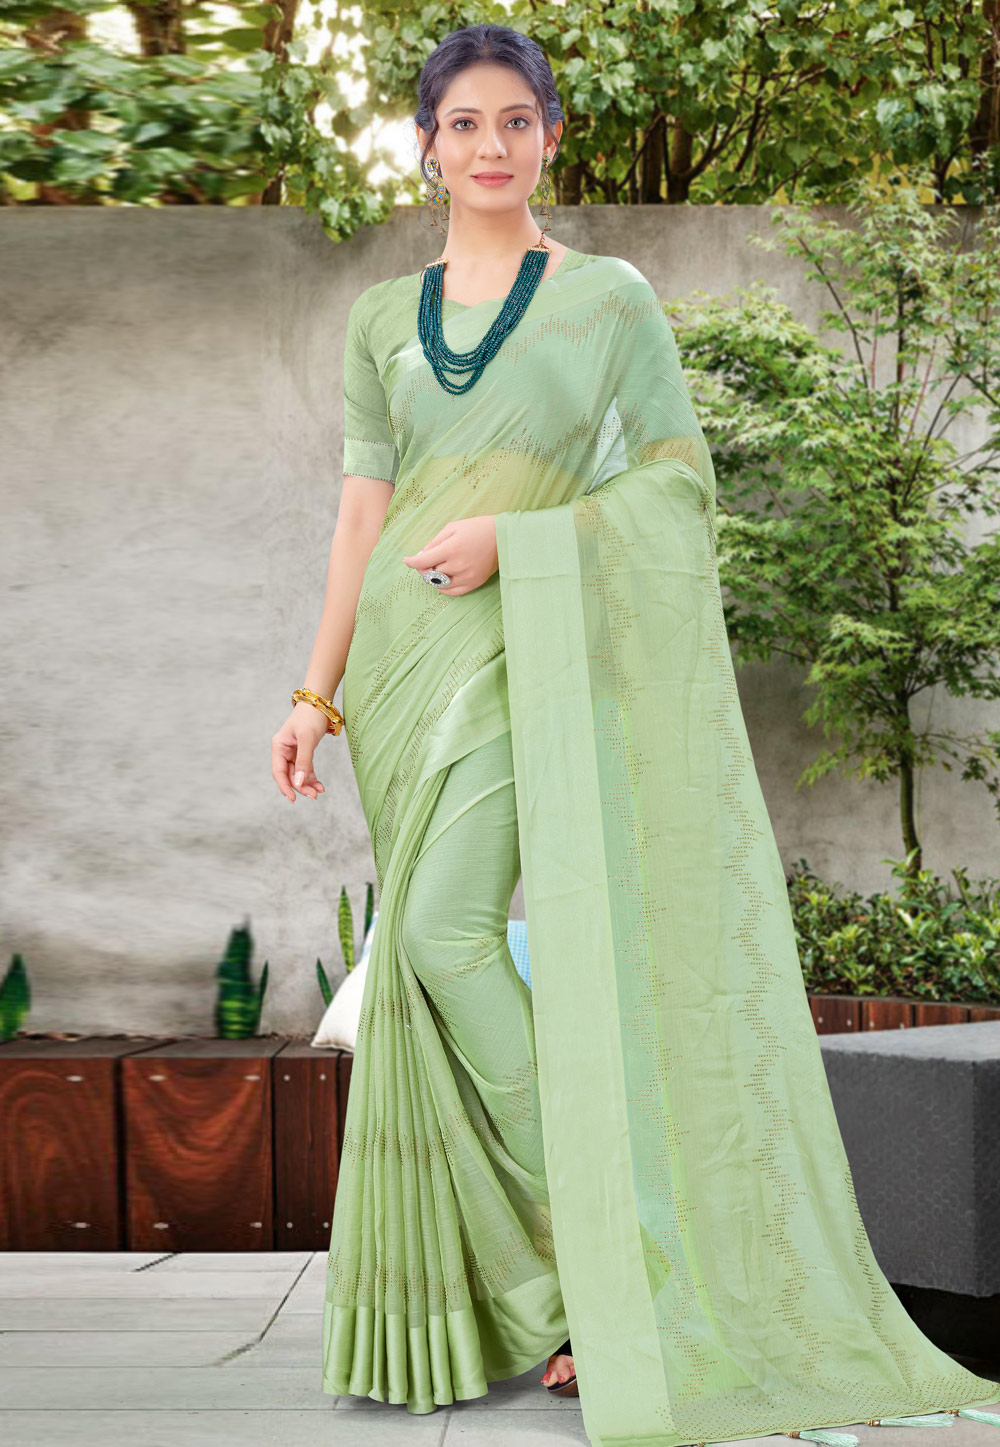 https://resources.indianclothstore.com/resources/productimages/524106082021-Pista-Green-Chiffon-Satin-Festival-Wear-Saree.jpg